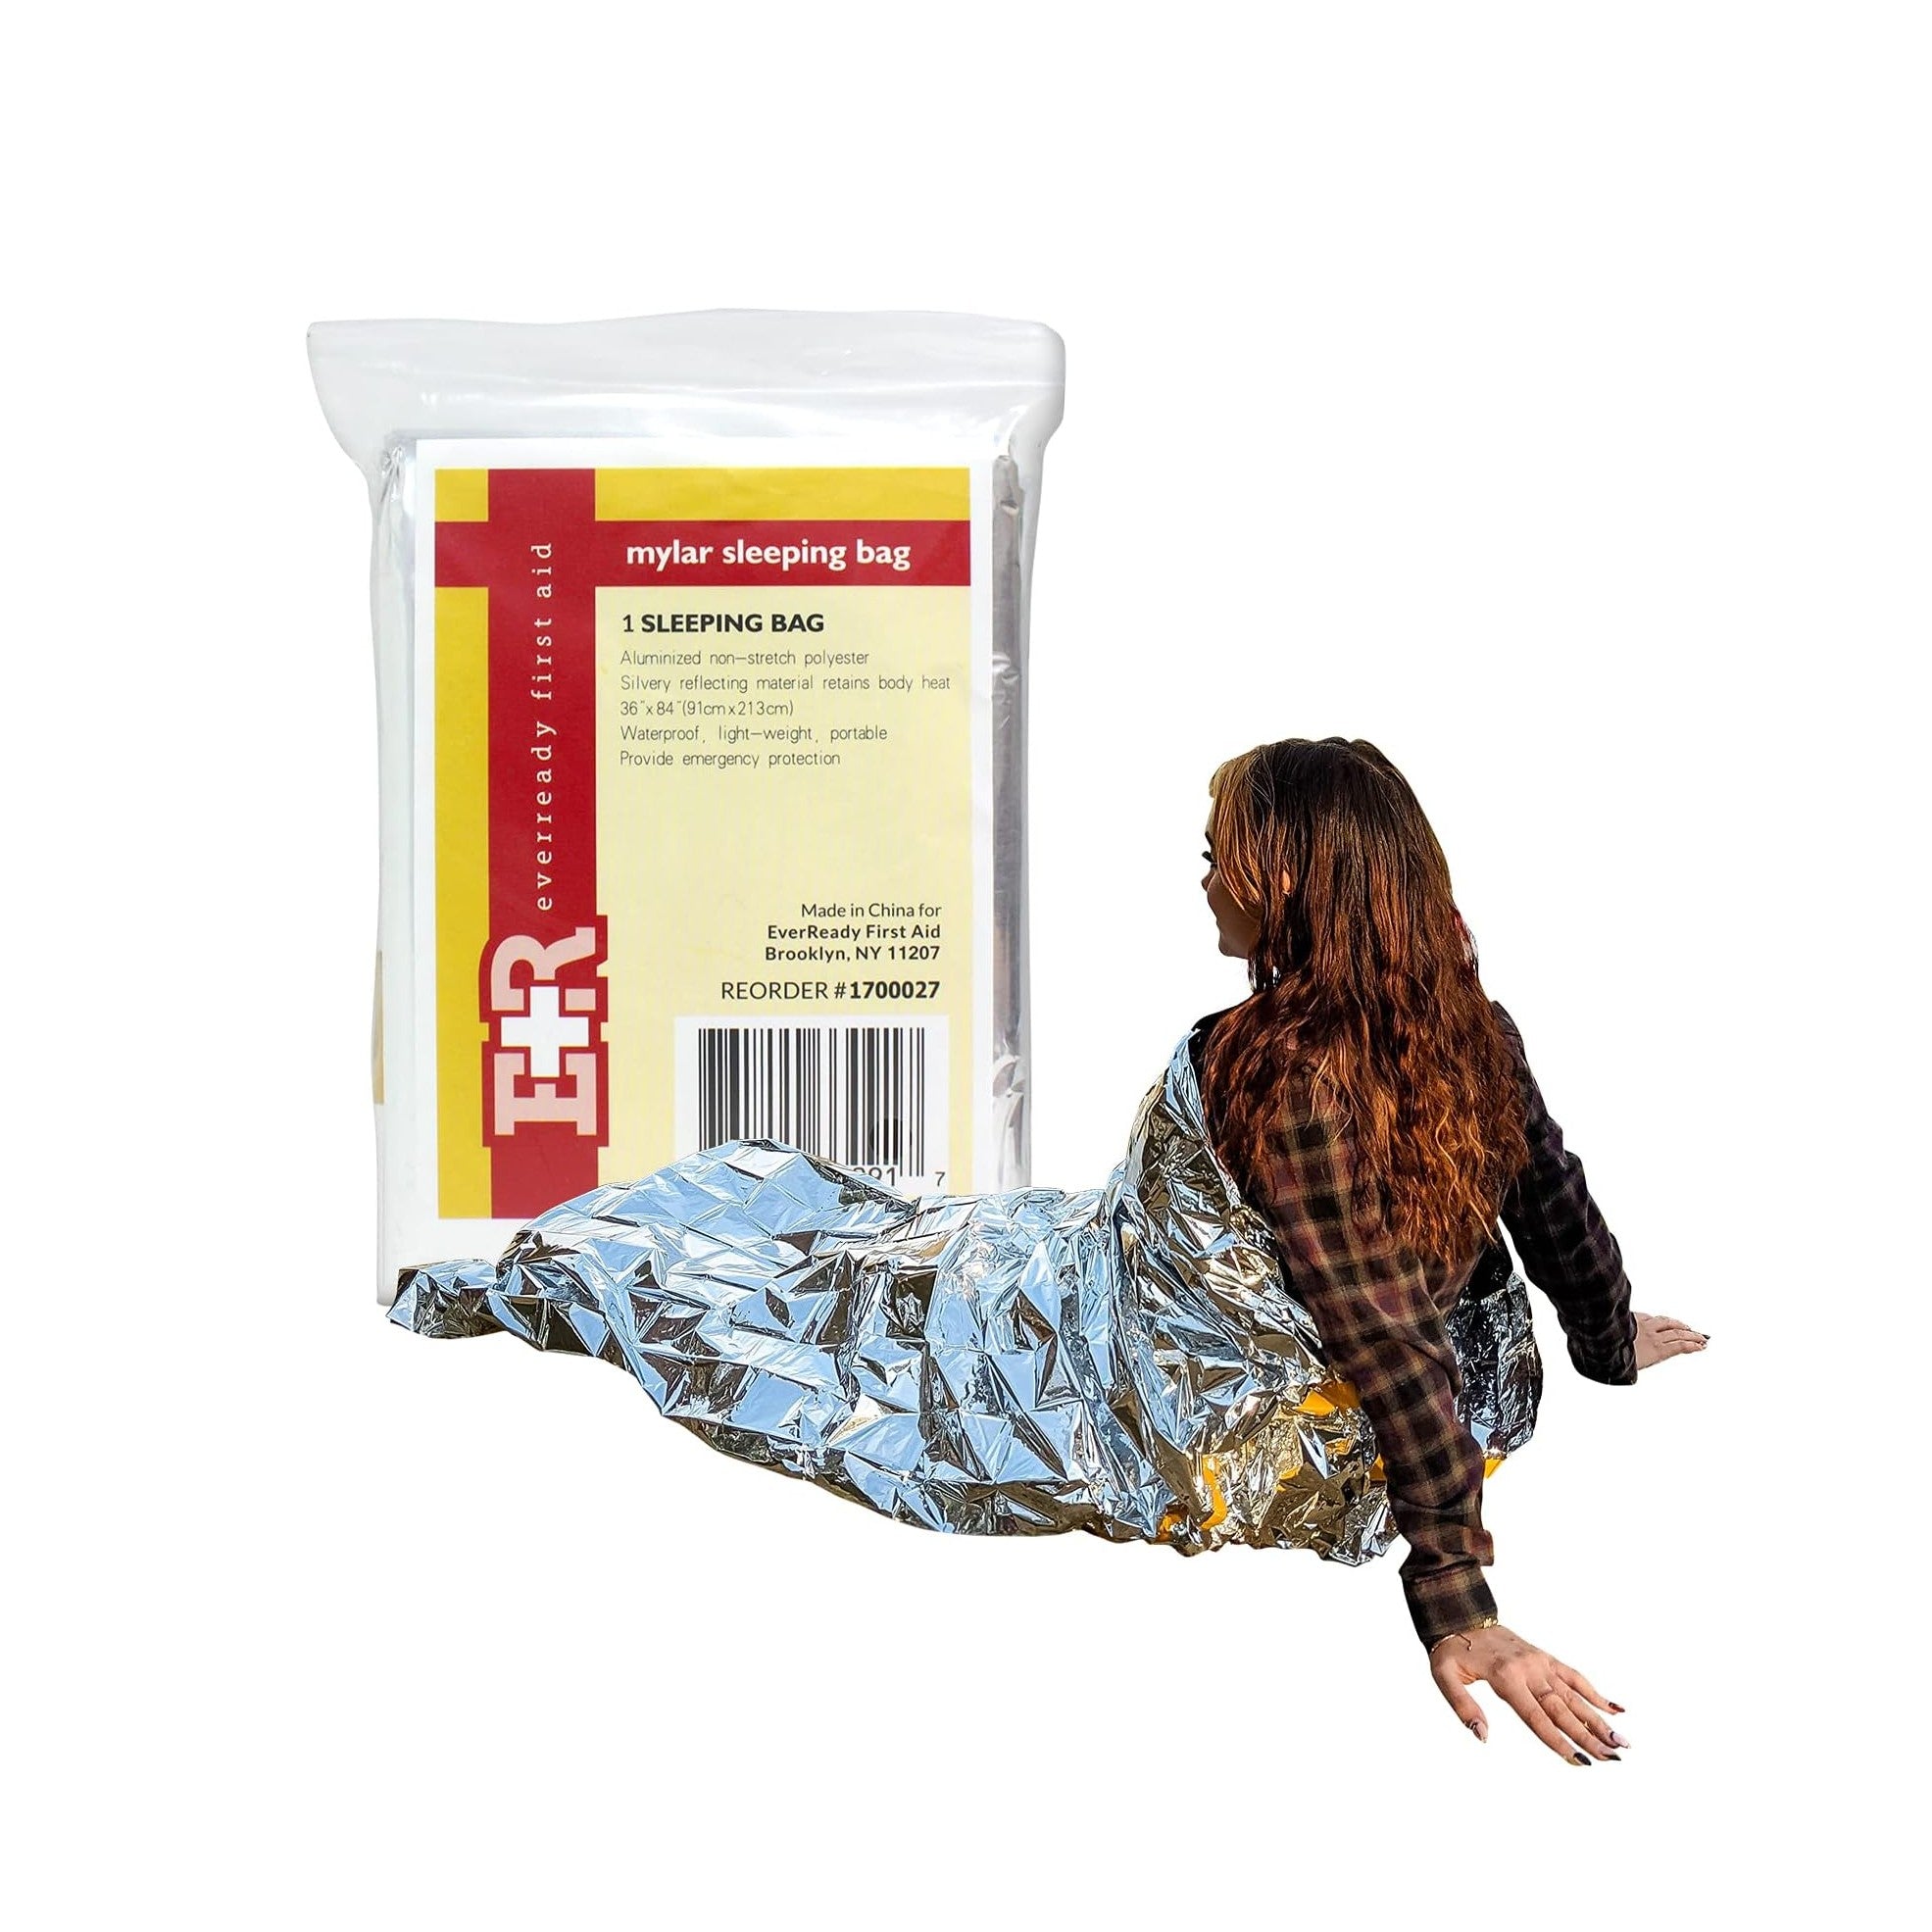 Ever Ready First Aid Emergency Space Mylar Survival Camping Sleeping Bag 36” x 84”